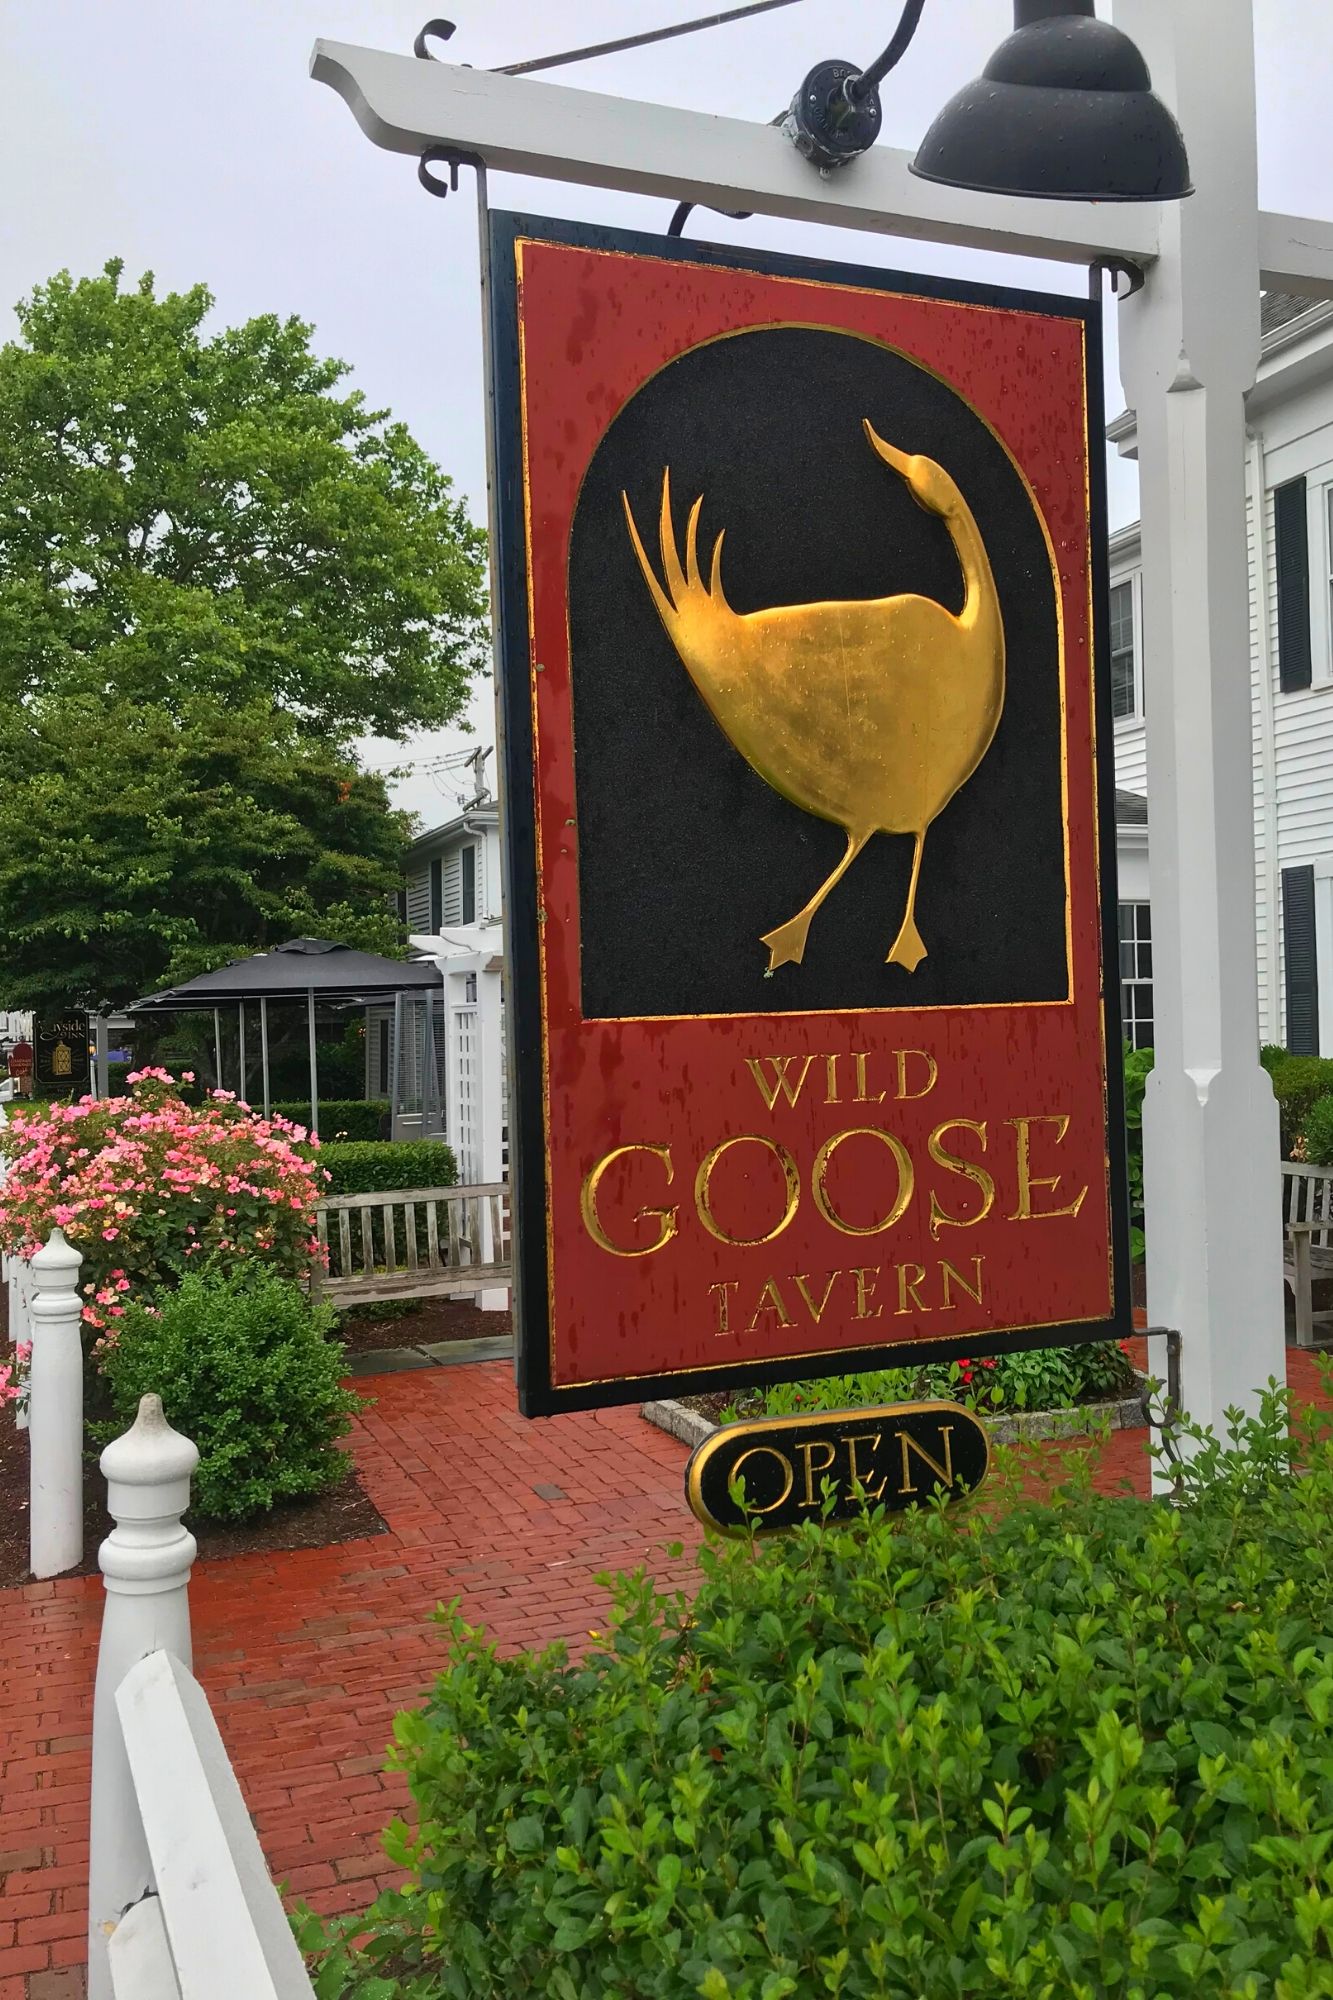 Enjoy a perfect day trip to Chatham in Cape Cod